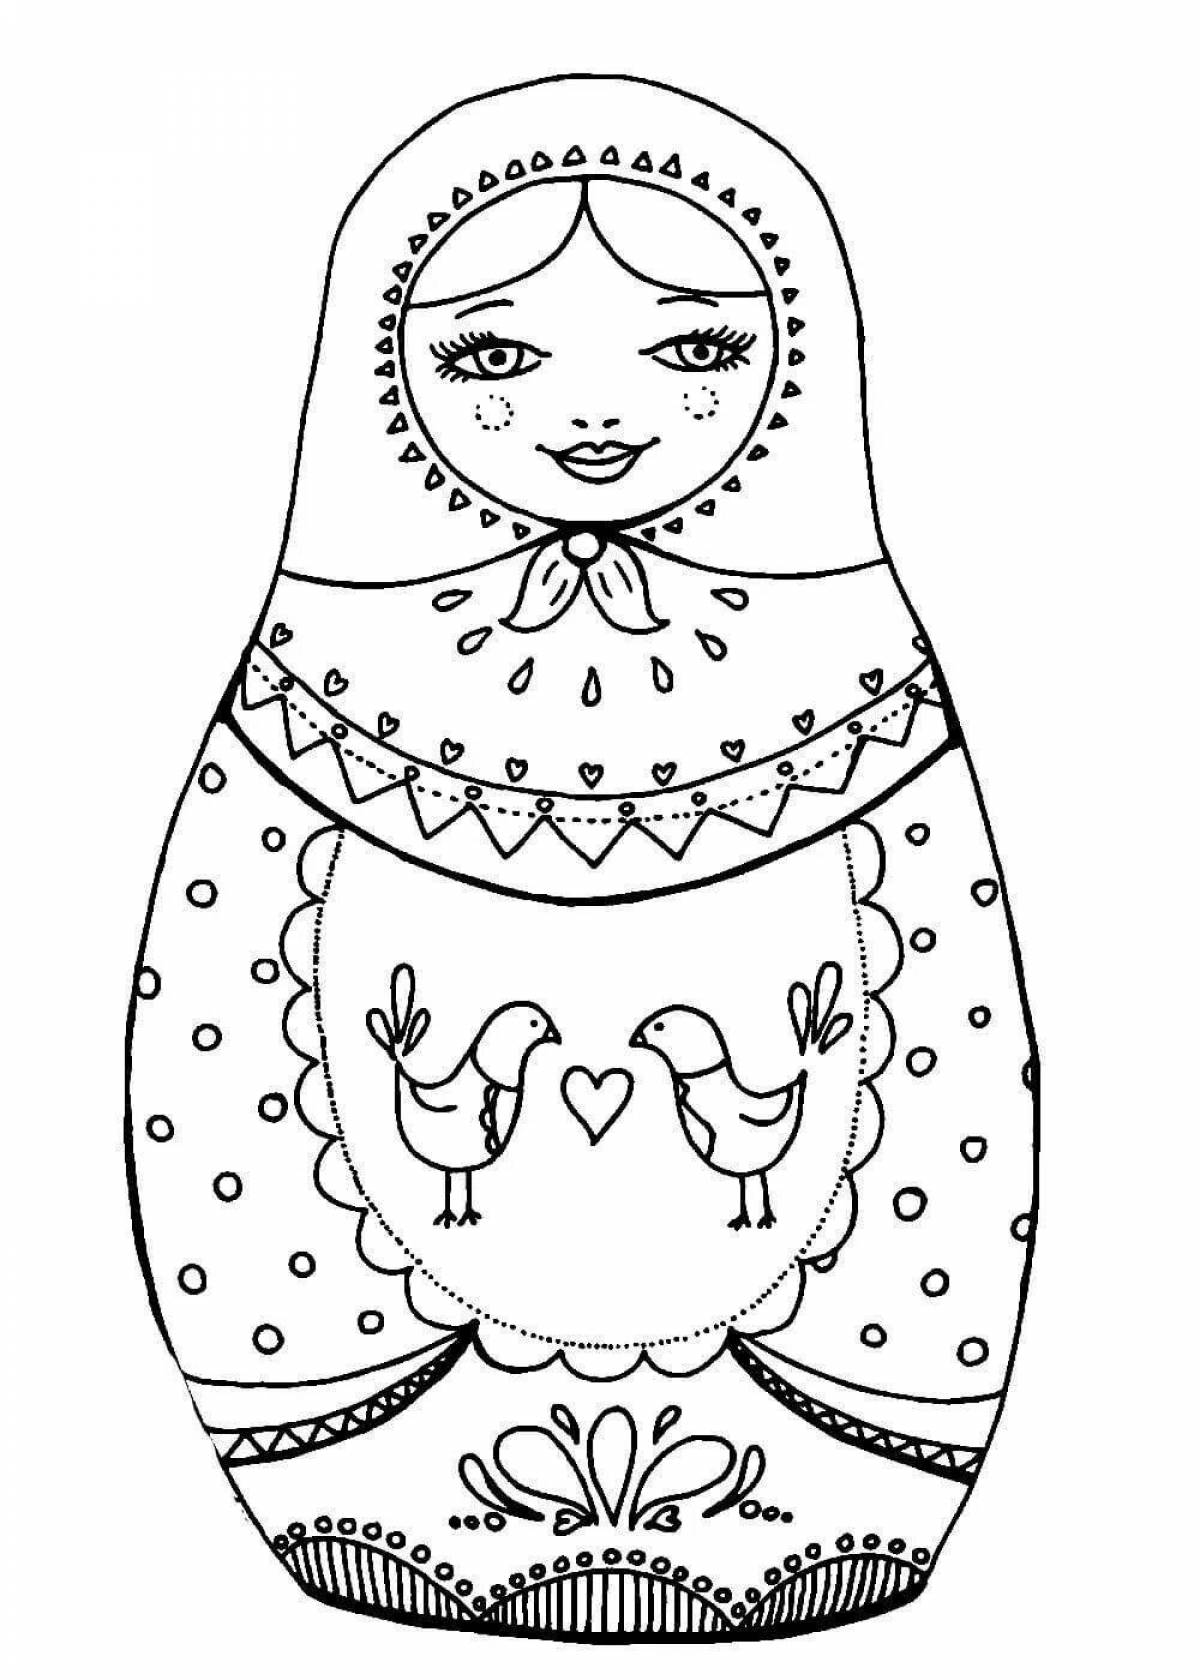 Amazing Russian matryoshka coloring book for 6-7 year olds